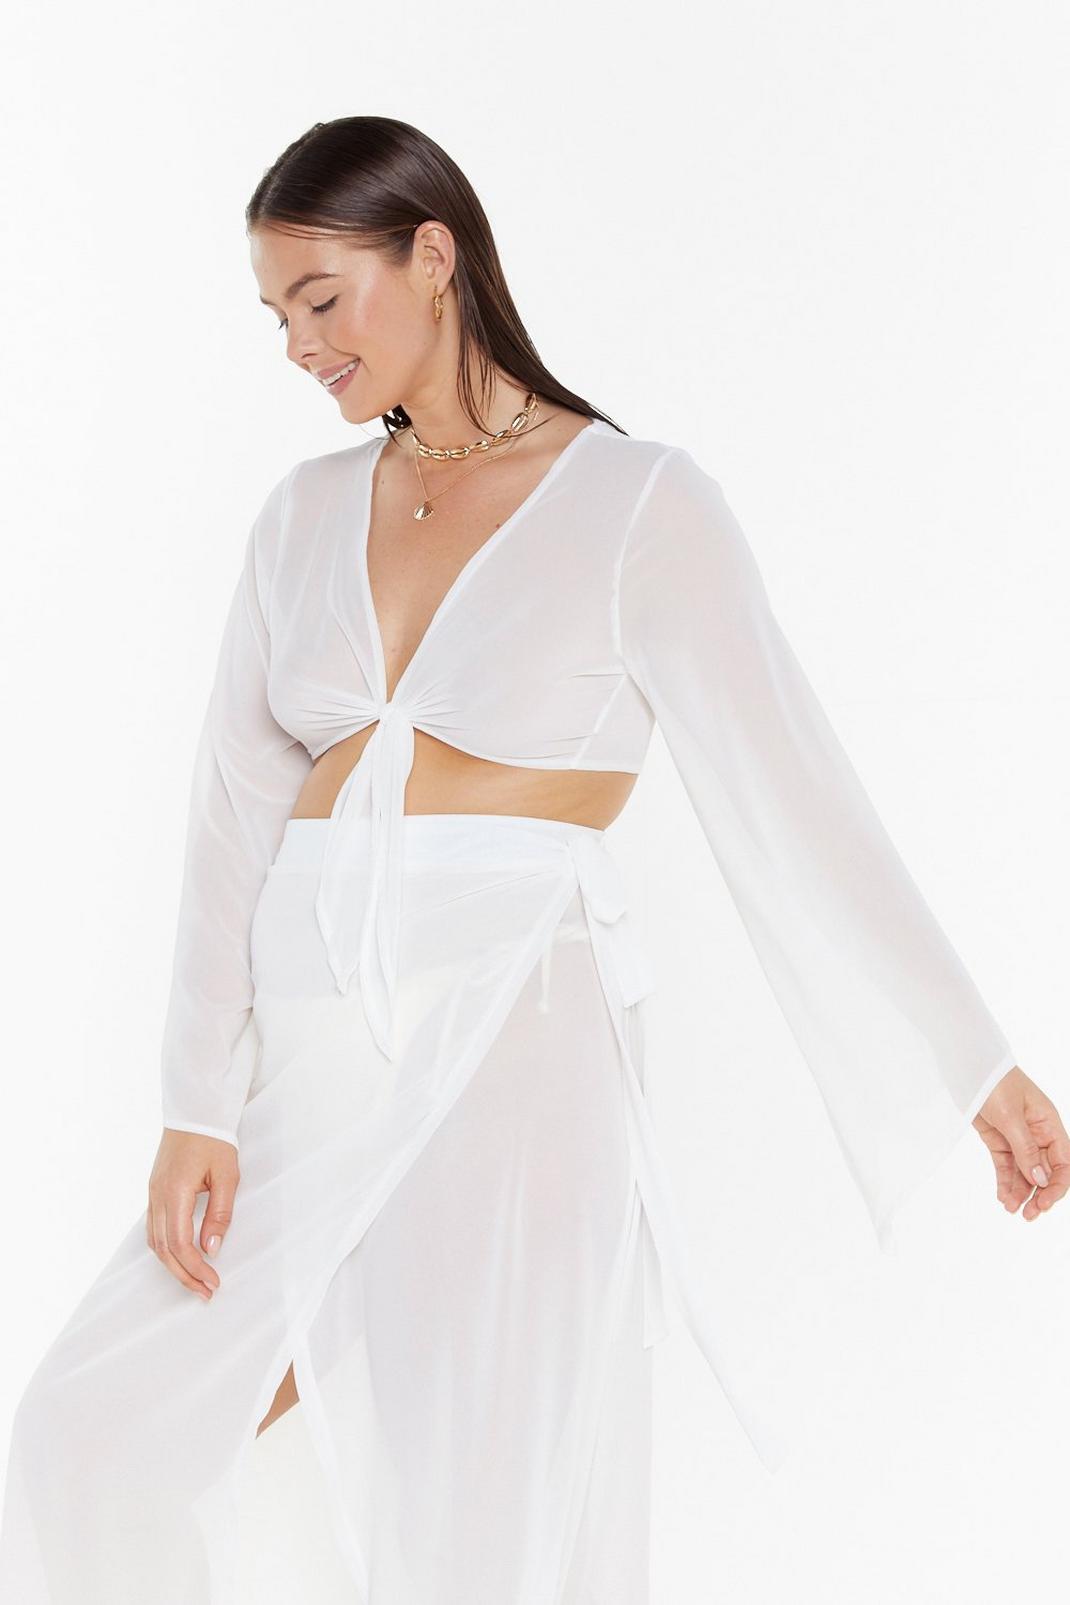 We'll Sea About That Chiffon Cover-Up Plus Top image number 1